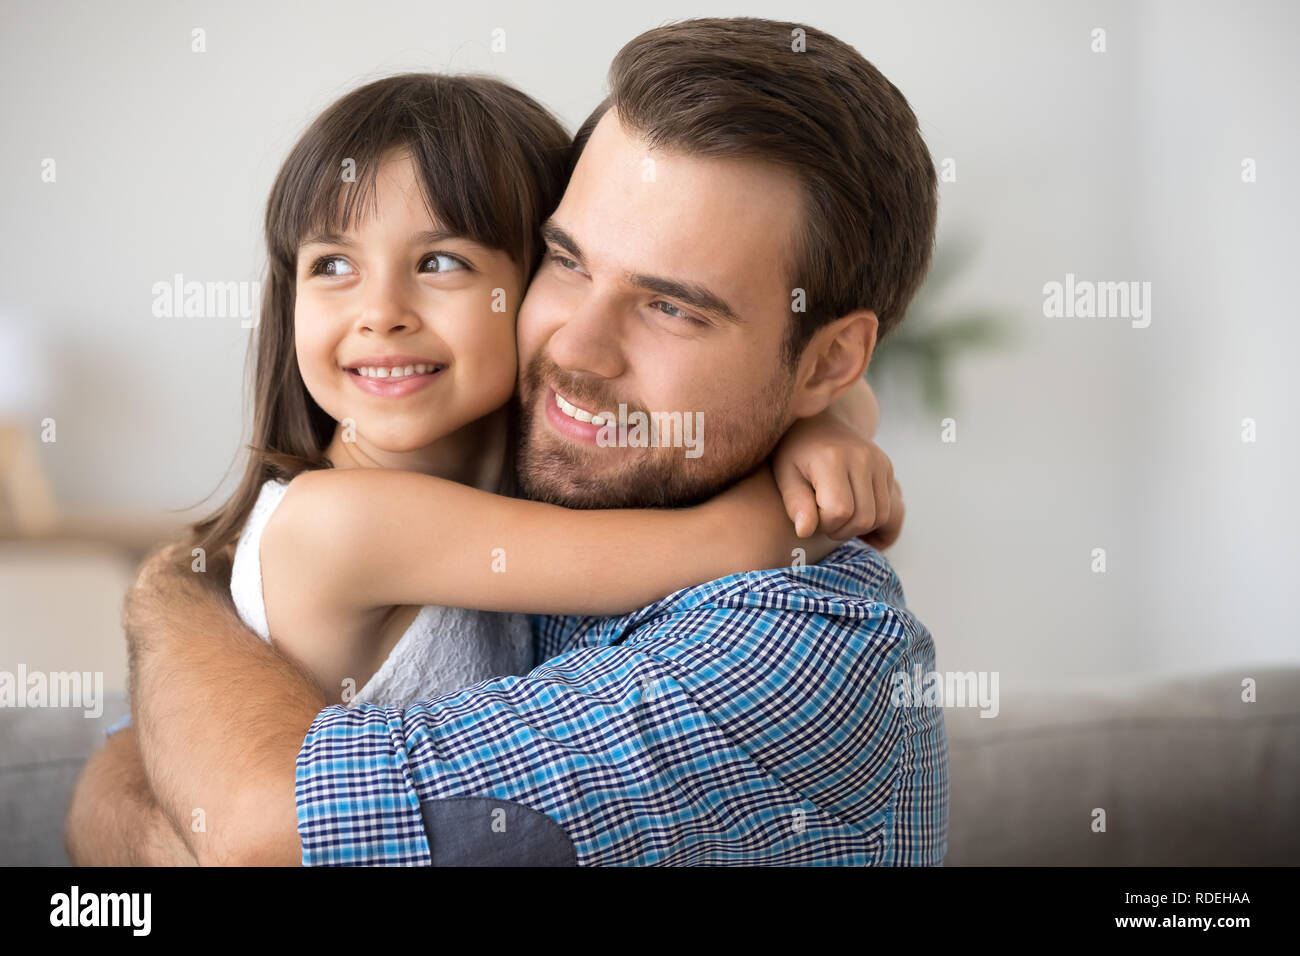 Hopeful single dad embracing kid daughter looking into bright fu Stock Photo